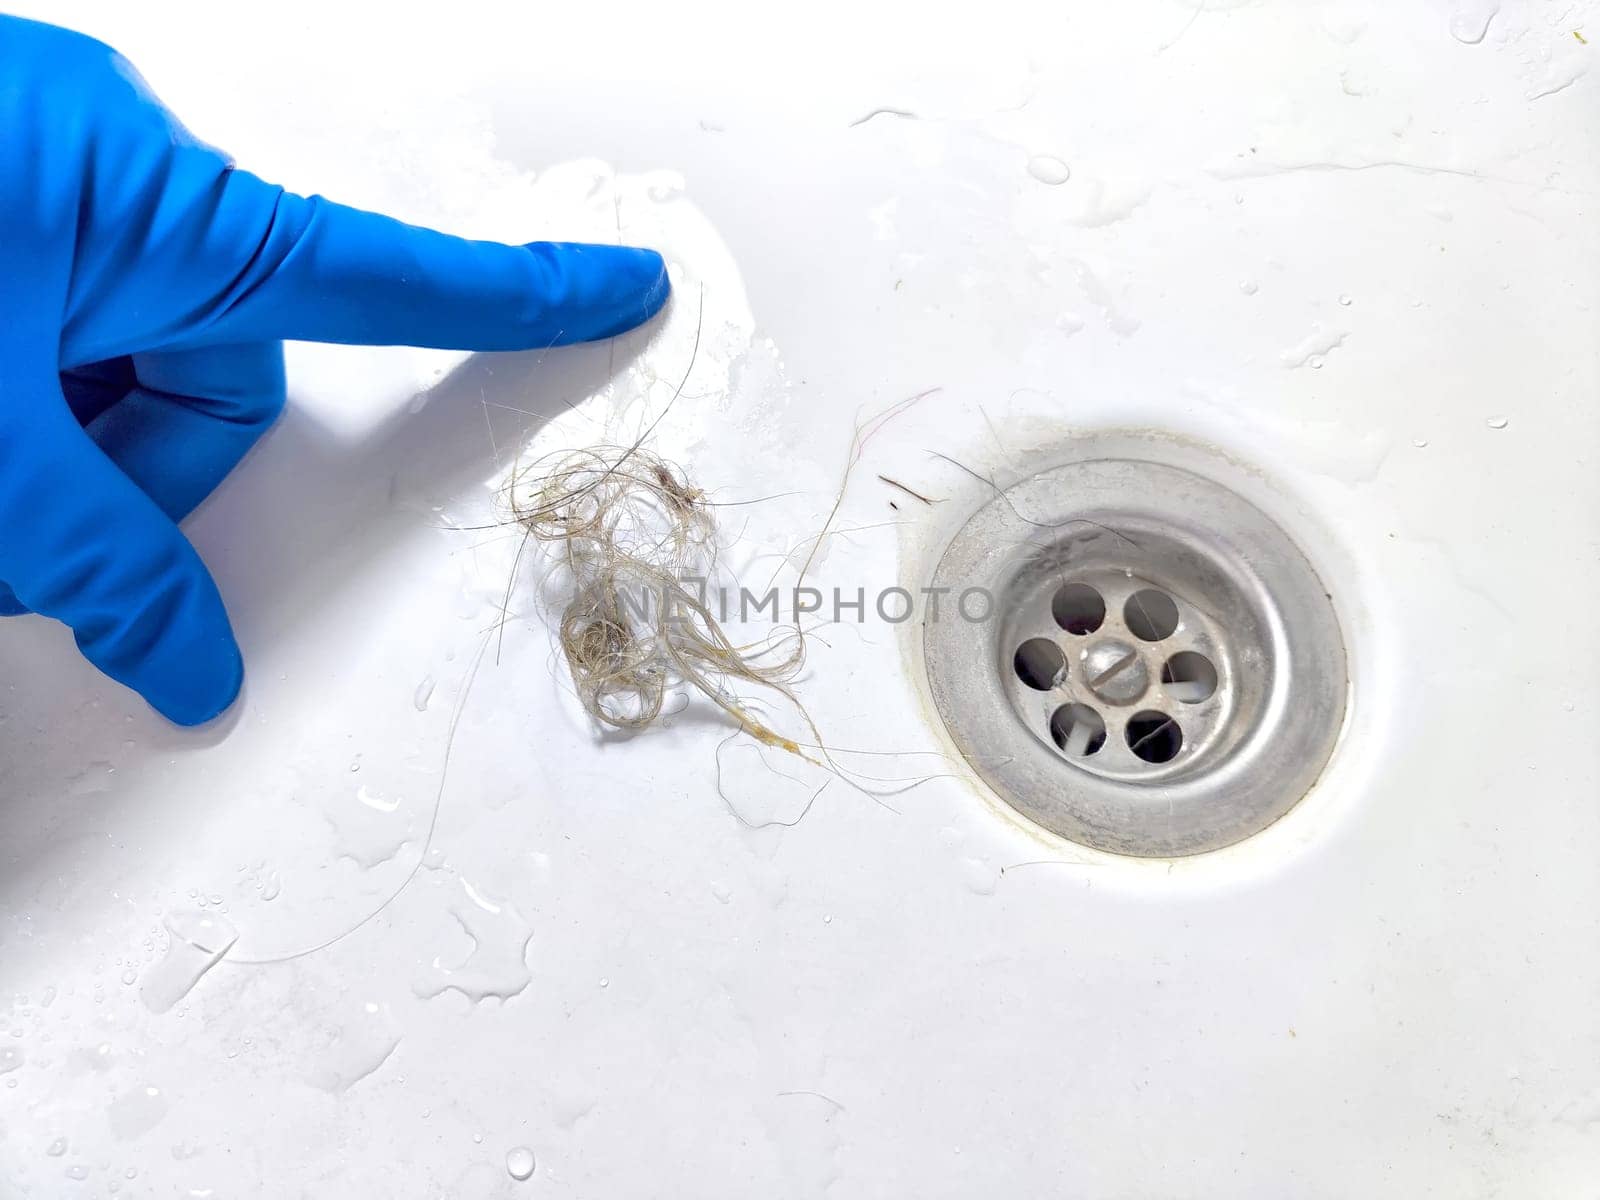 Removing Hair Clog From a Bathroom Sink Drain. Gloved hand extracting hair from sink